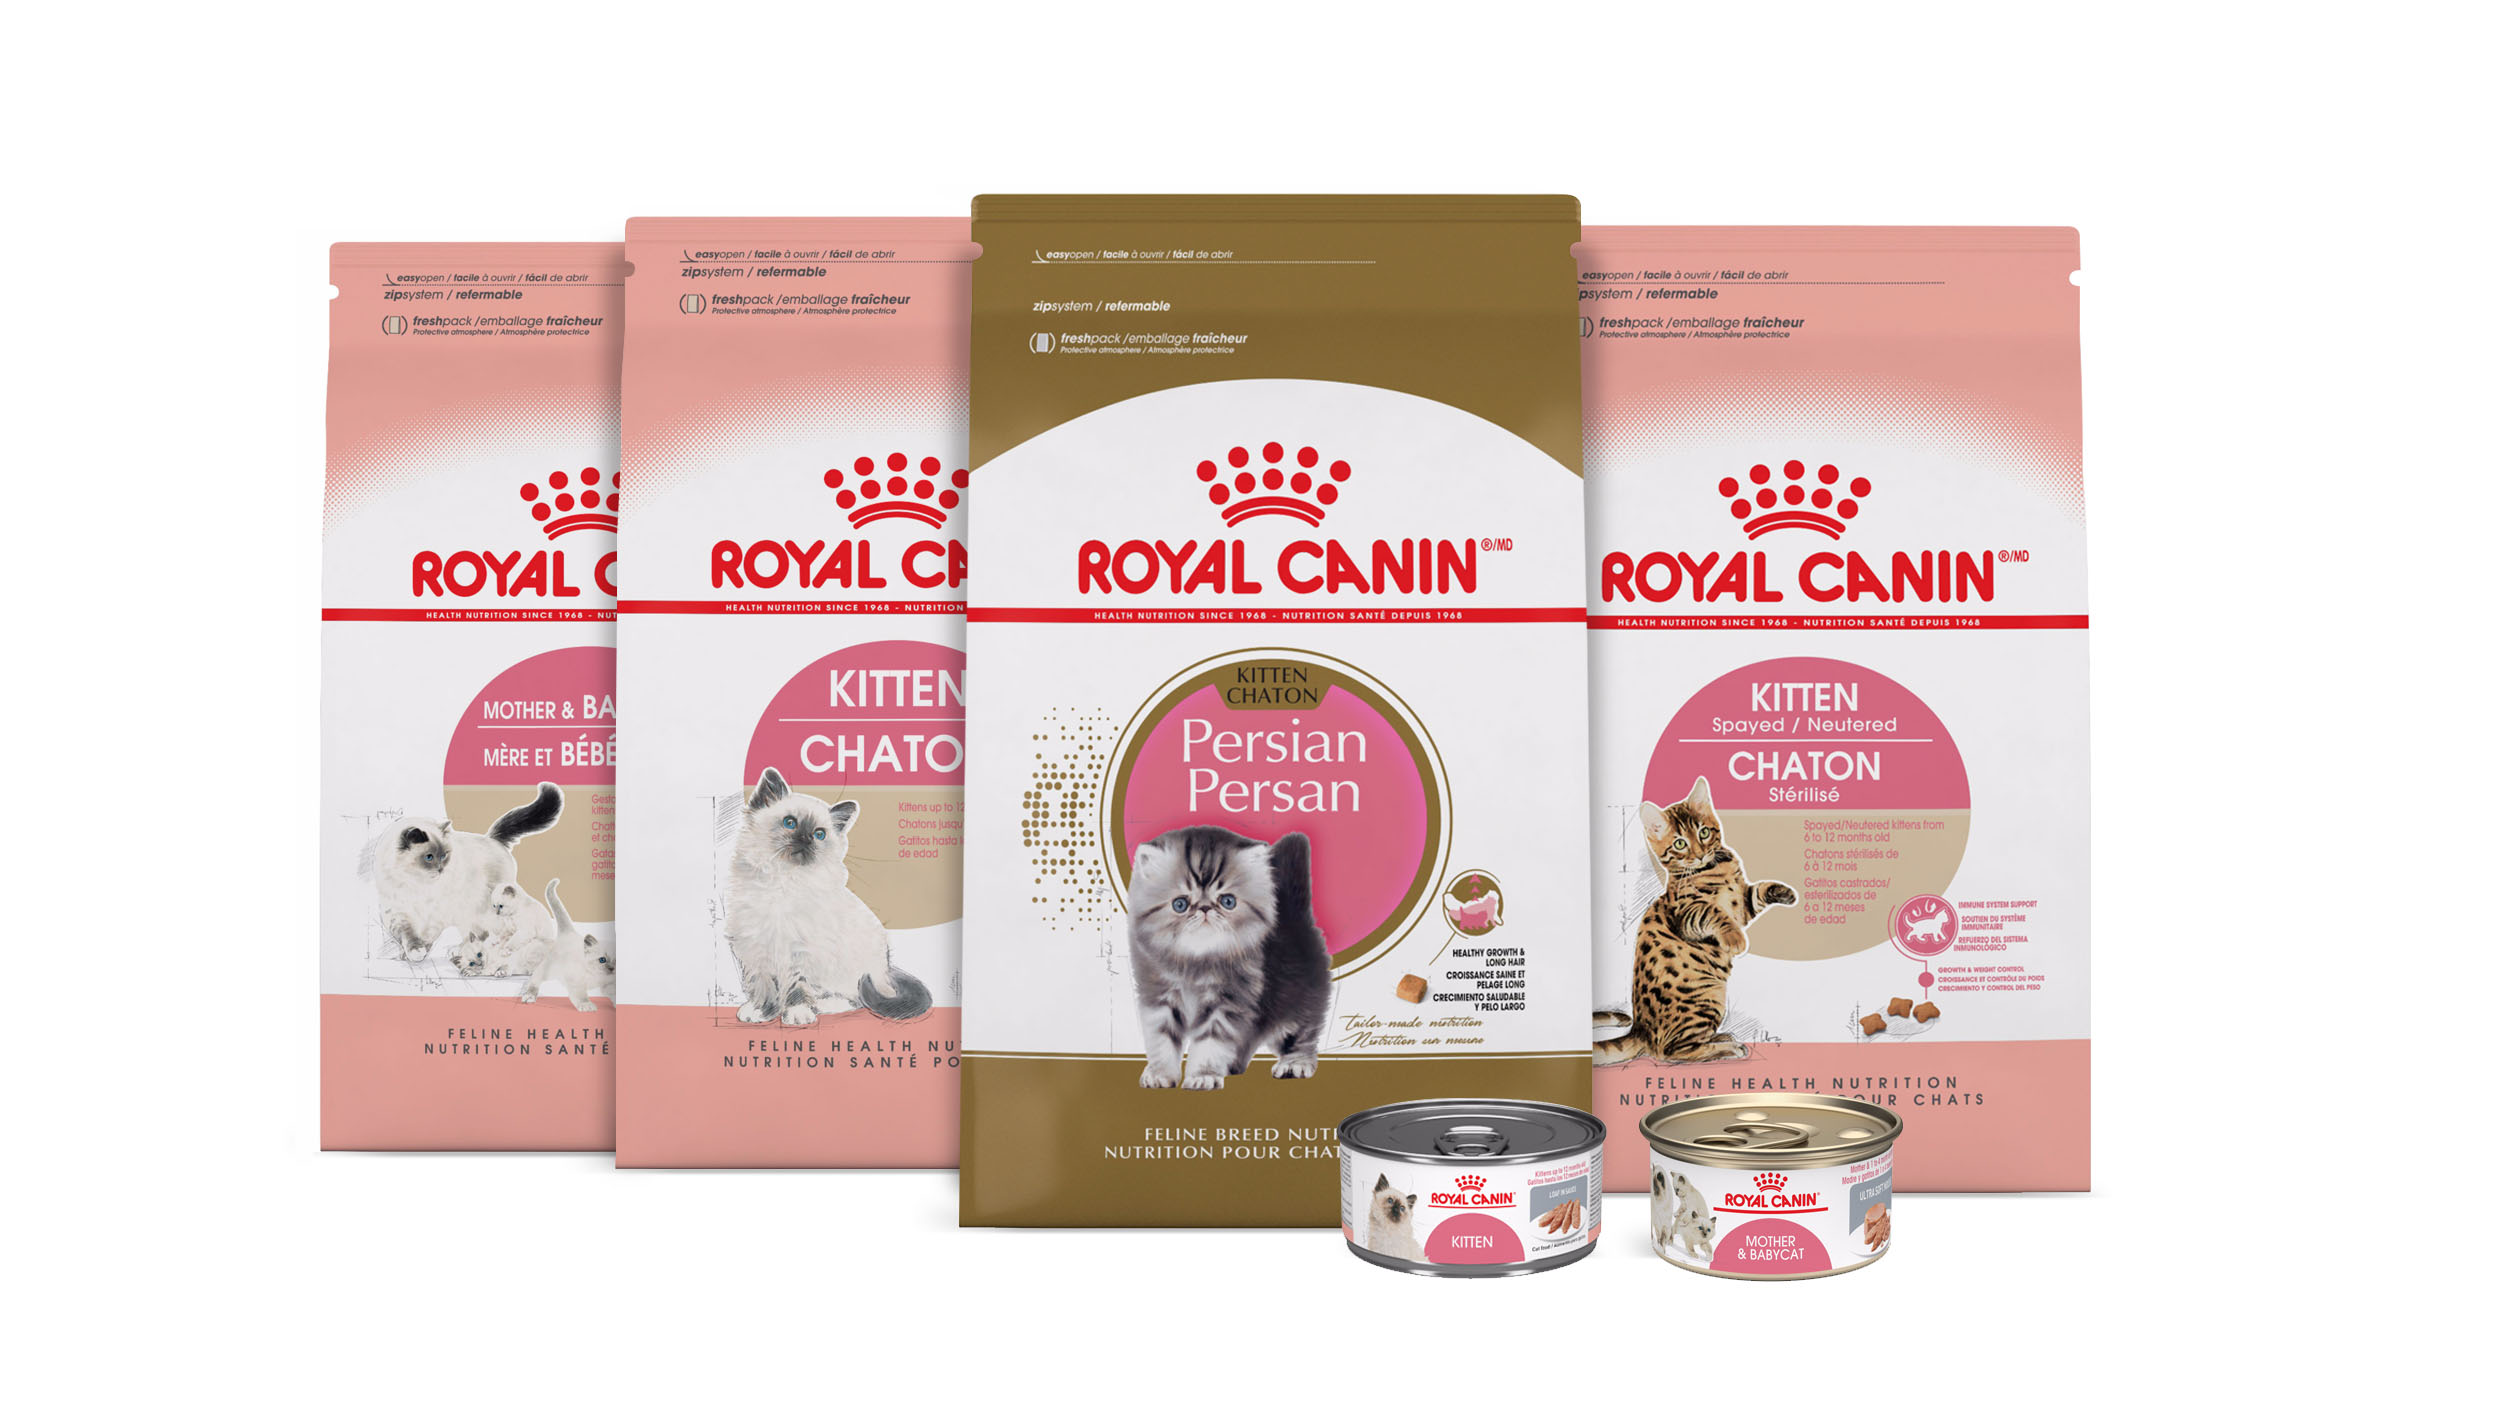 royal canin cancer diet